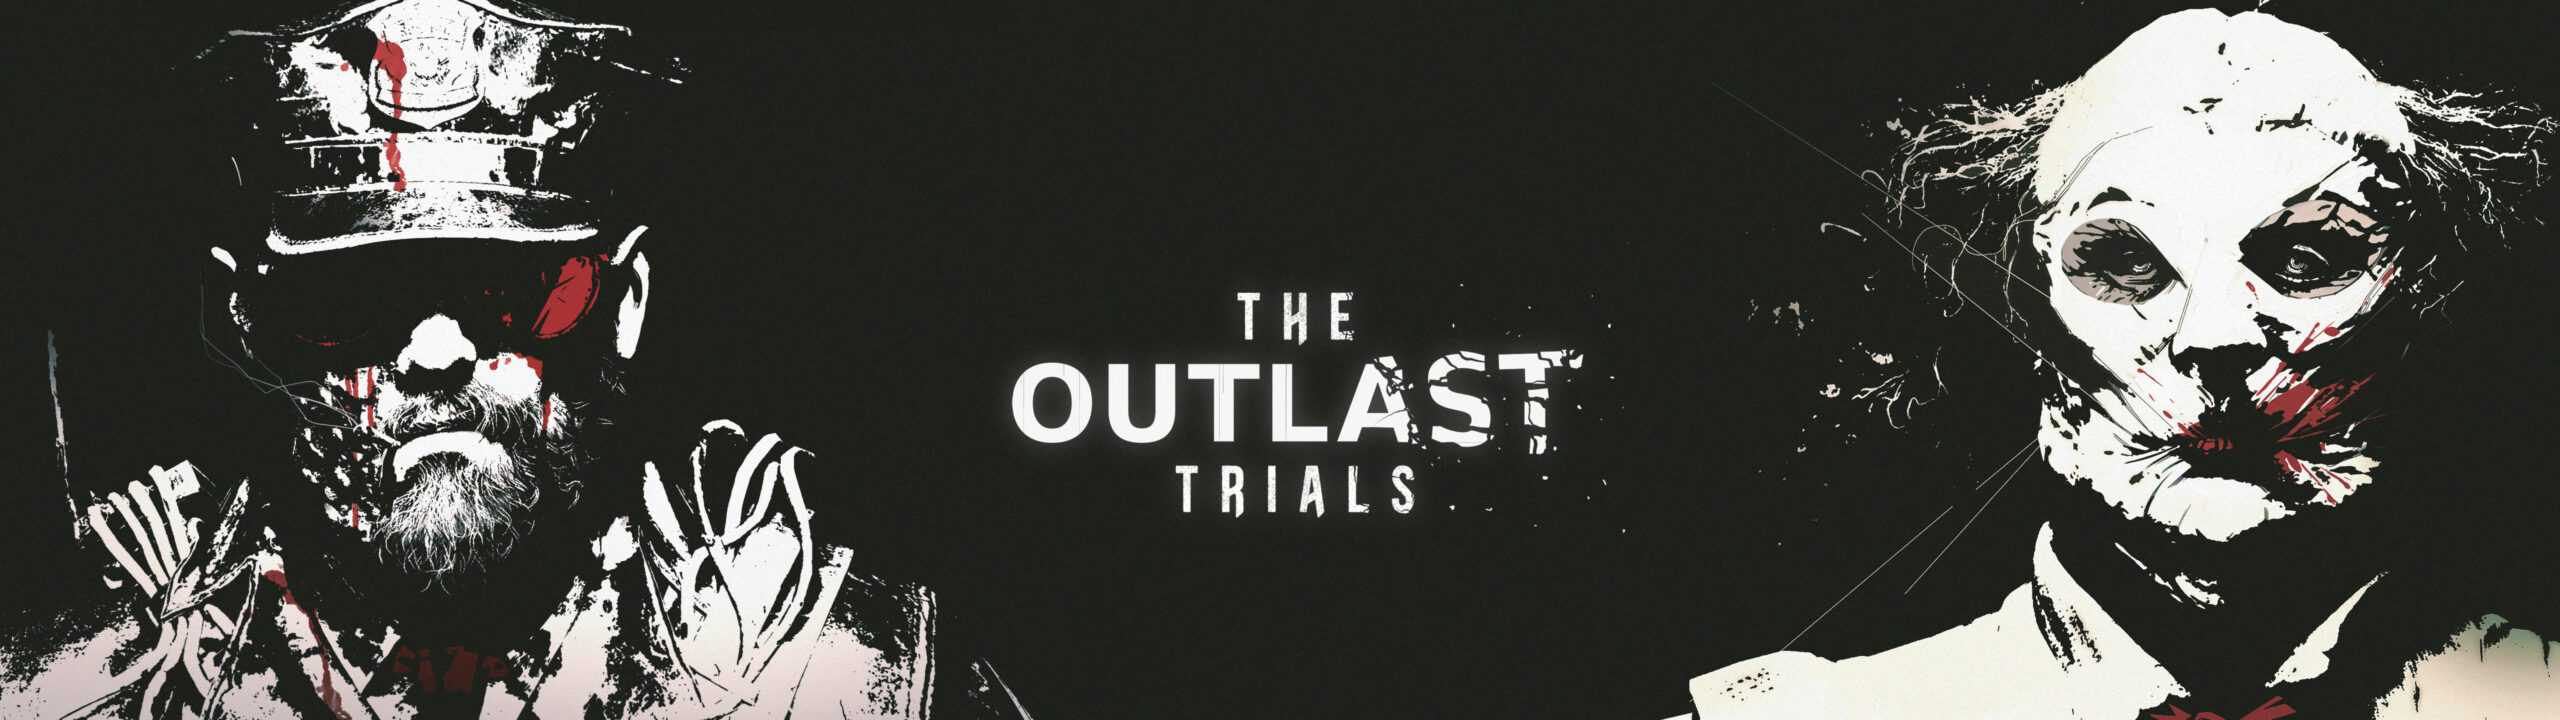 Does The Outlast Trials have crossplay?